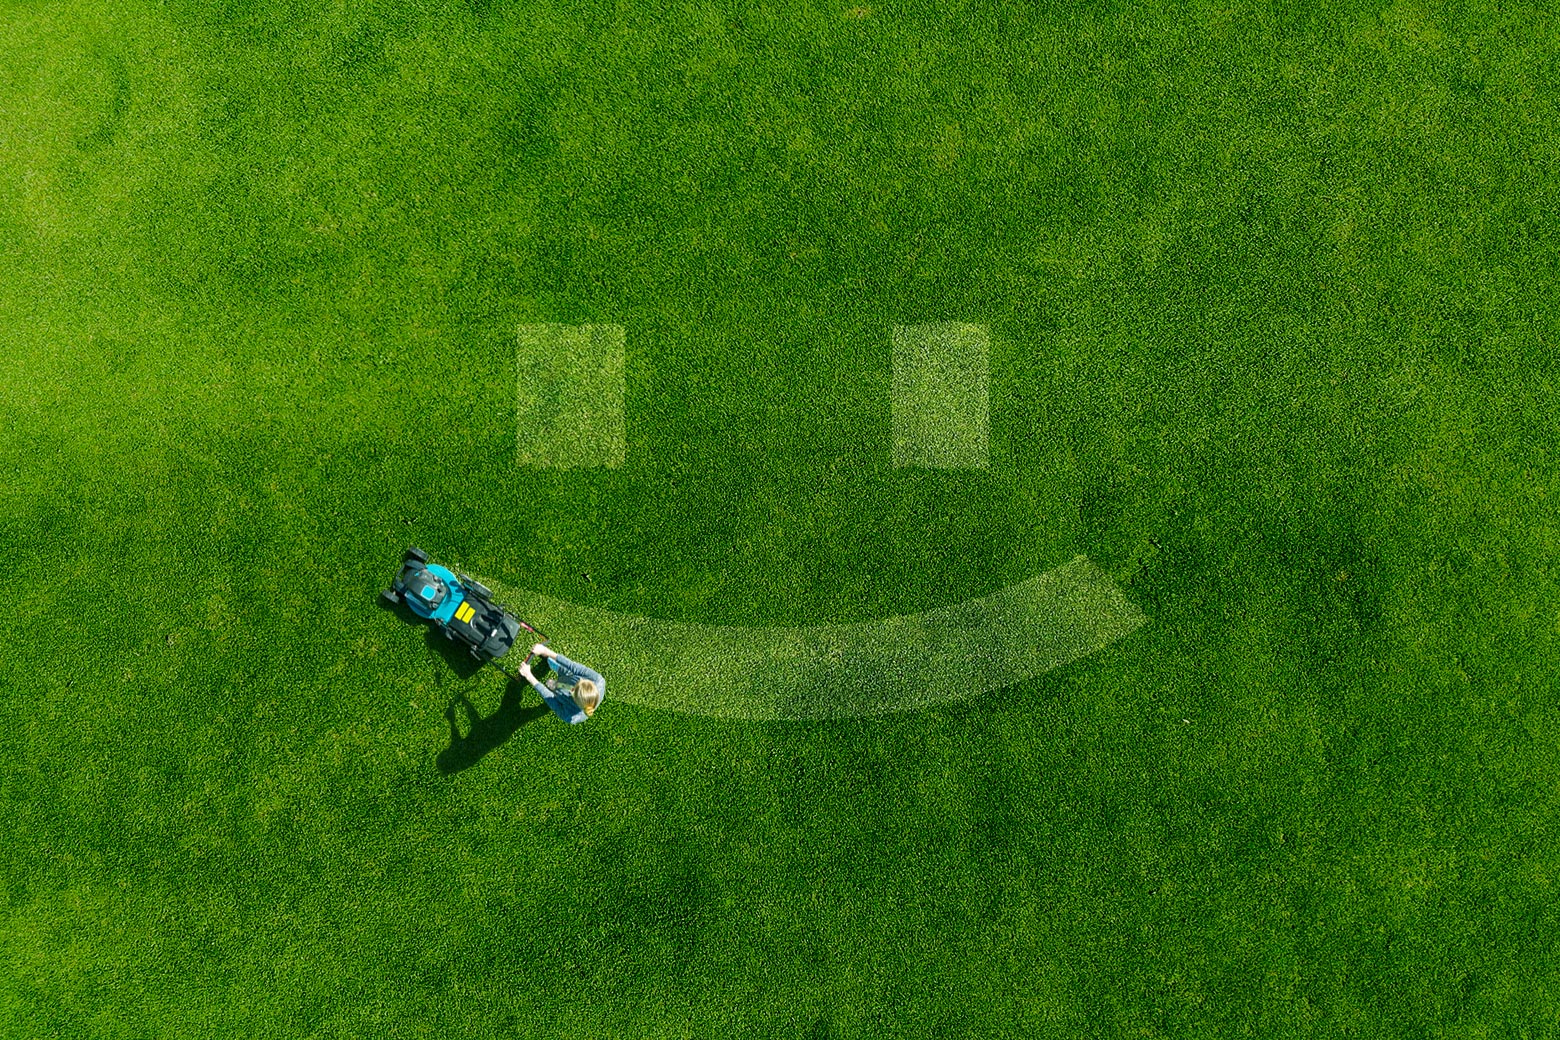 A smiley face shape being mowed into a lush green lawn.